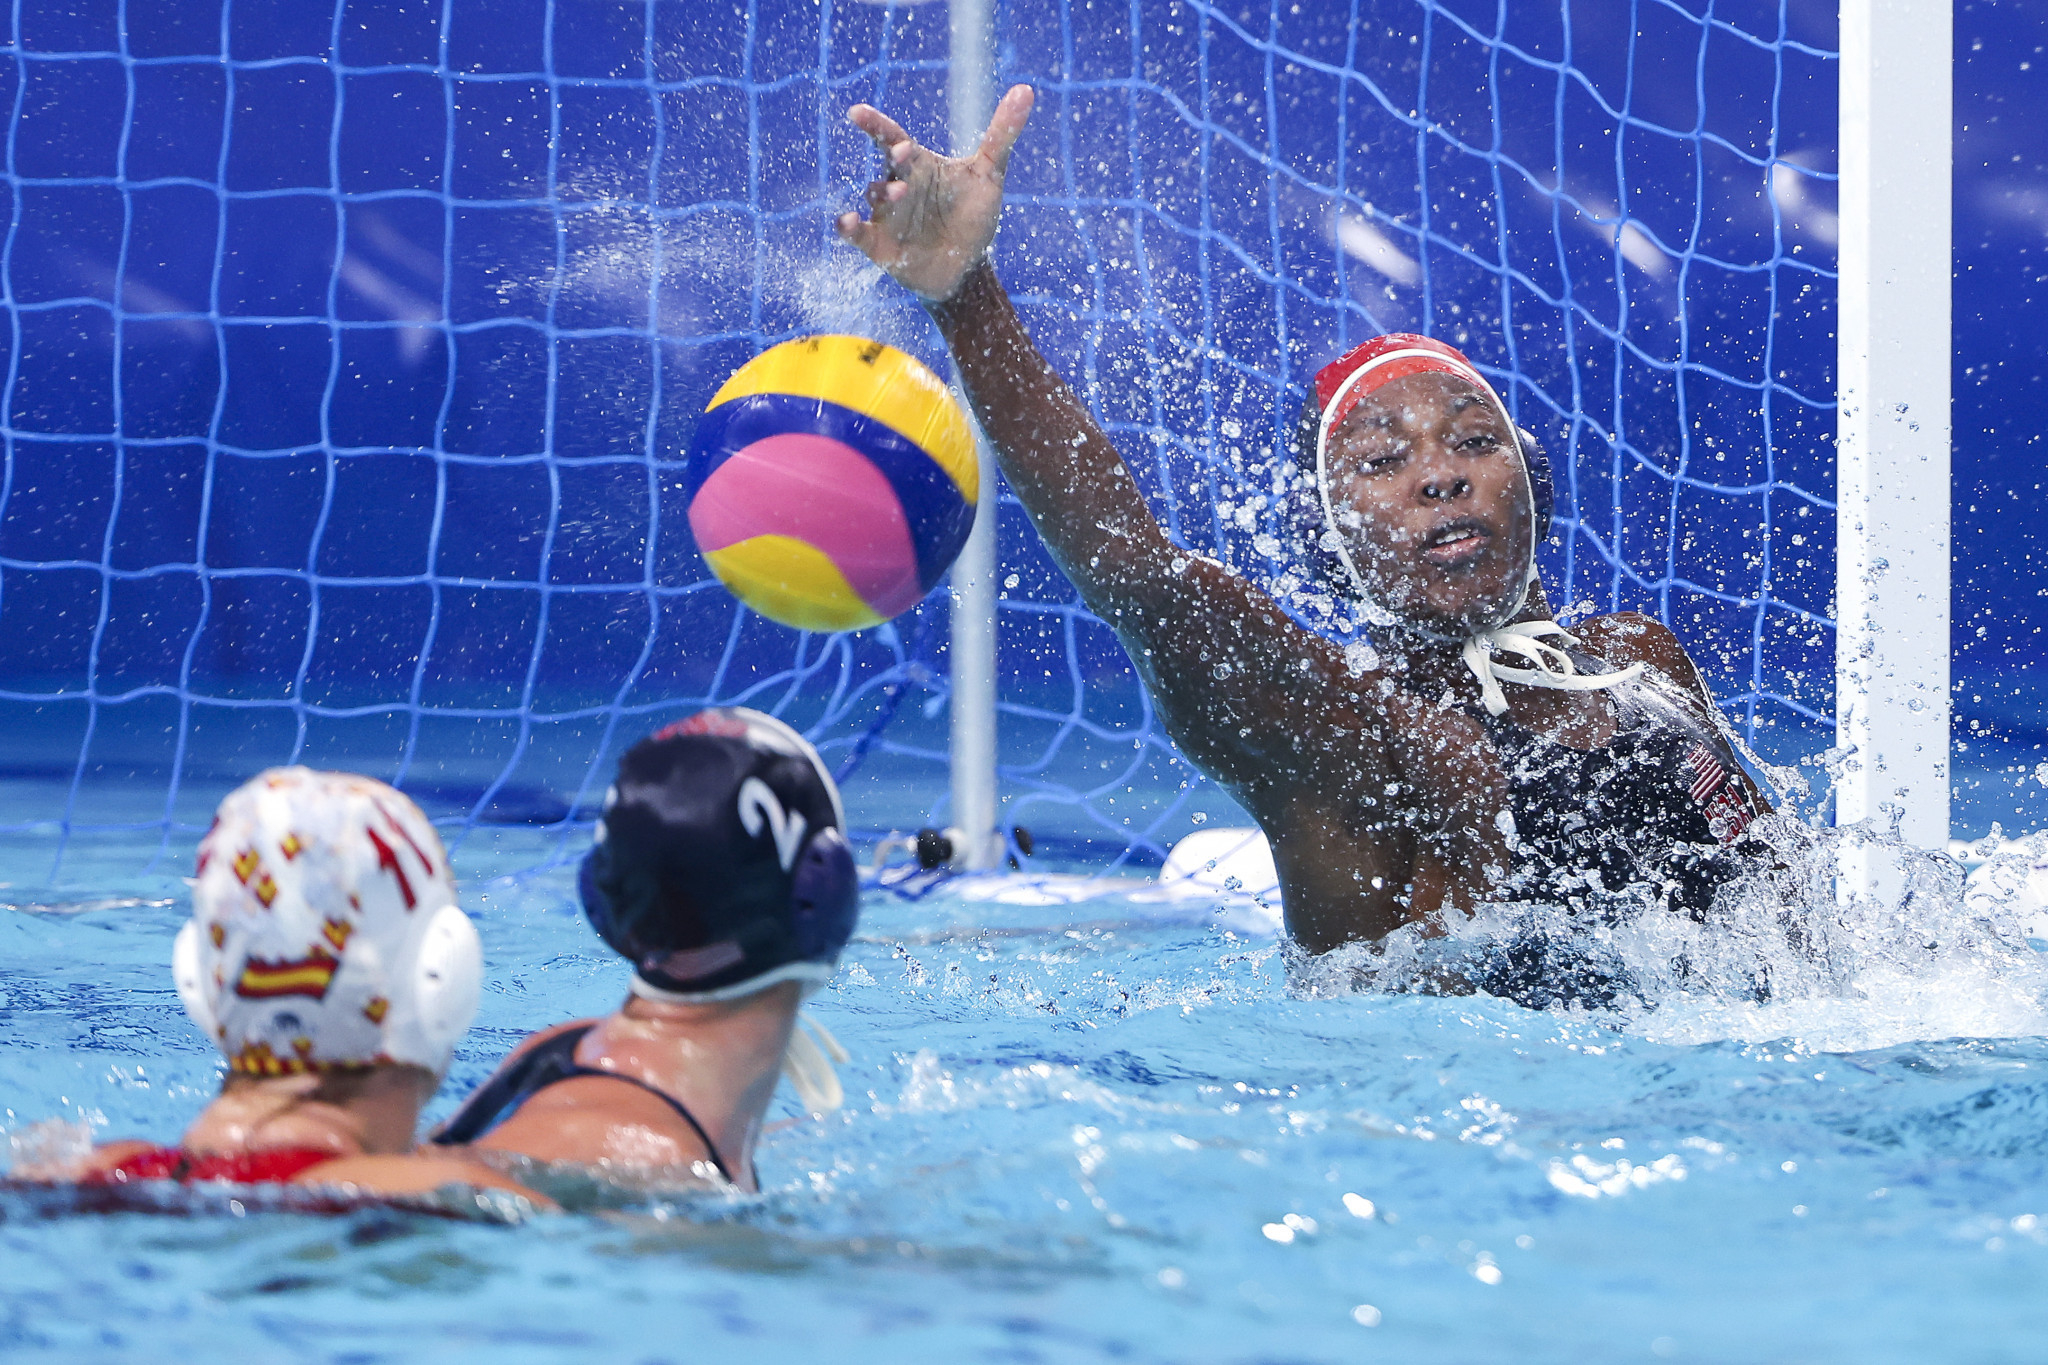 2048x1365 US win third consecutive Olympic women's water polo gold as Spain brushed aside